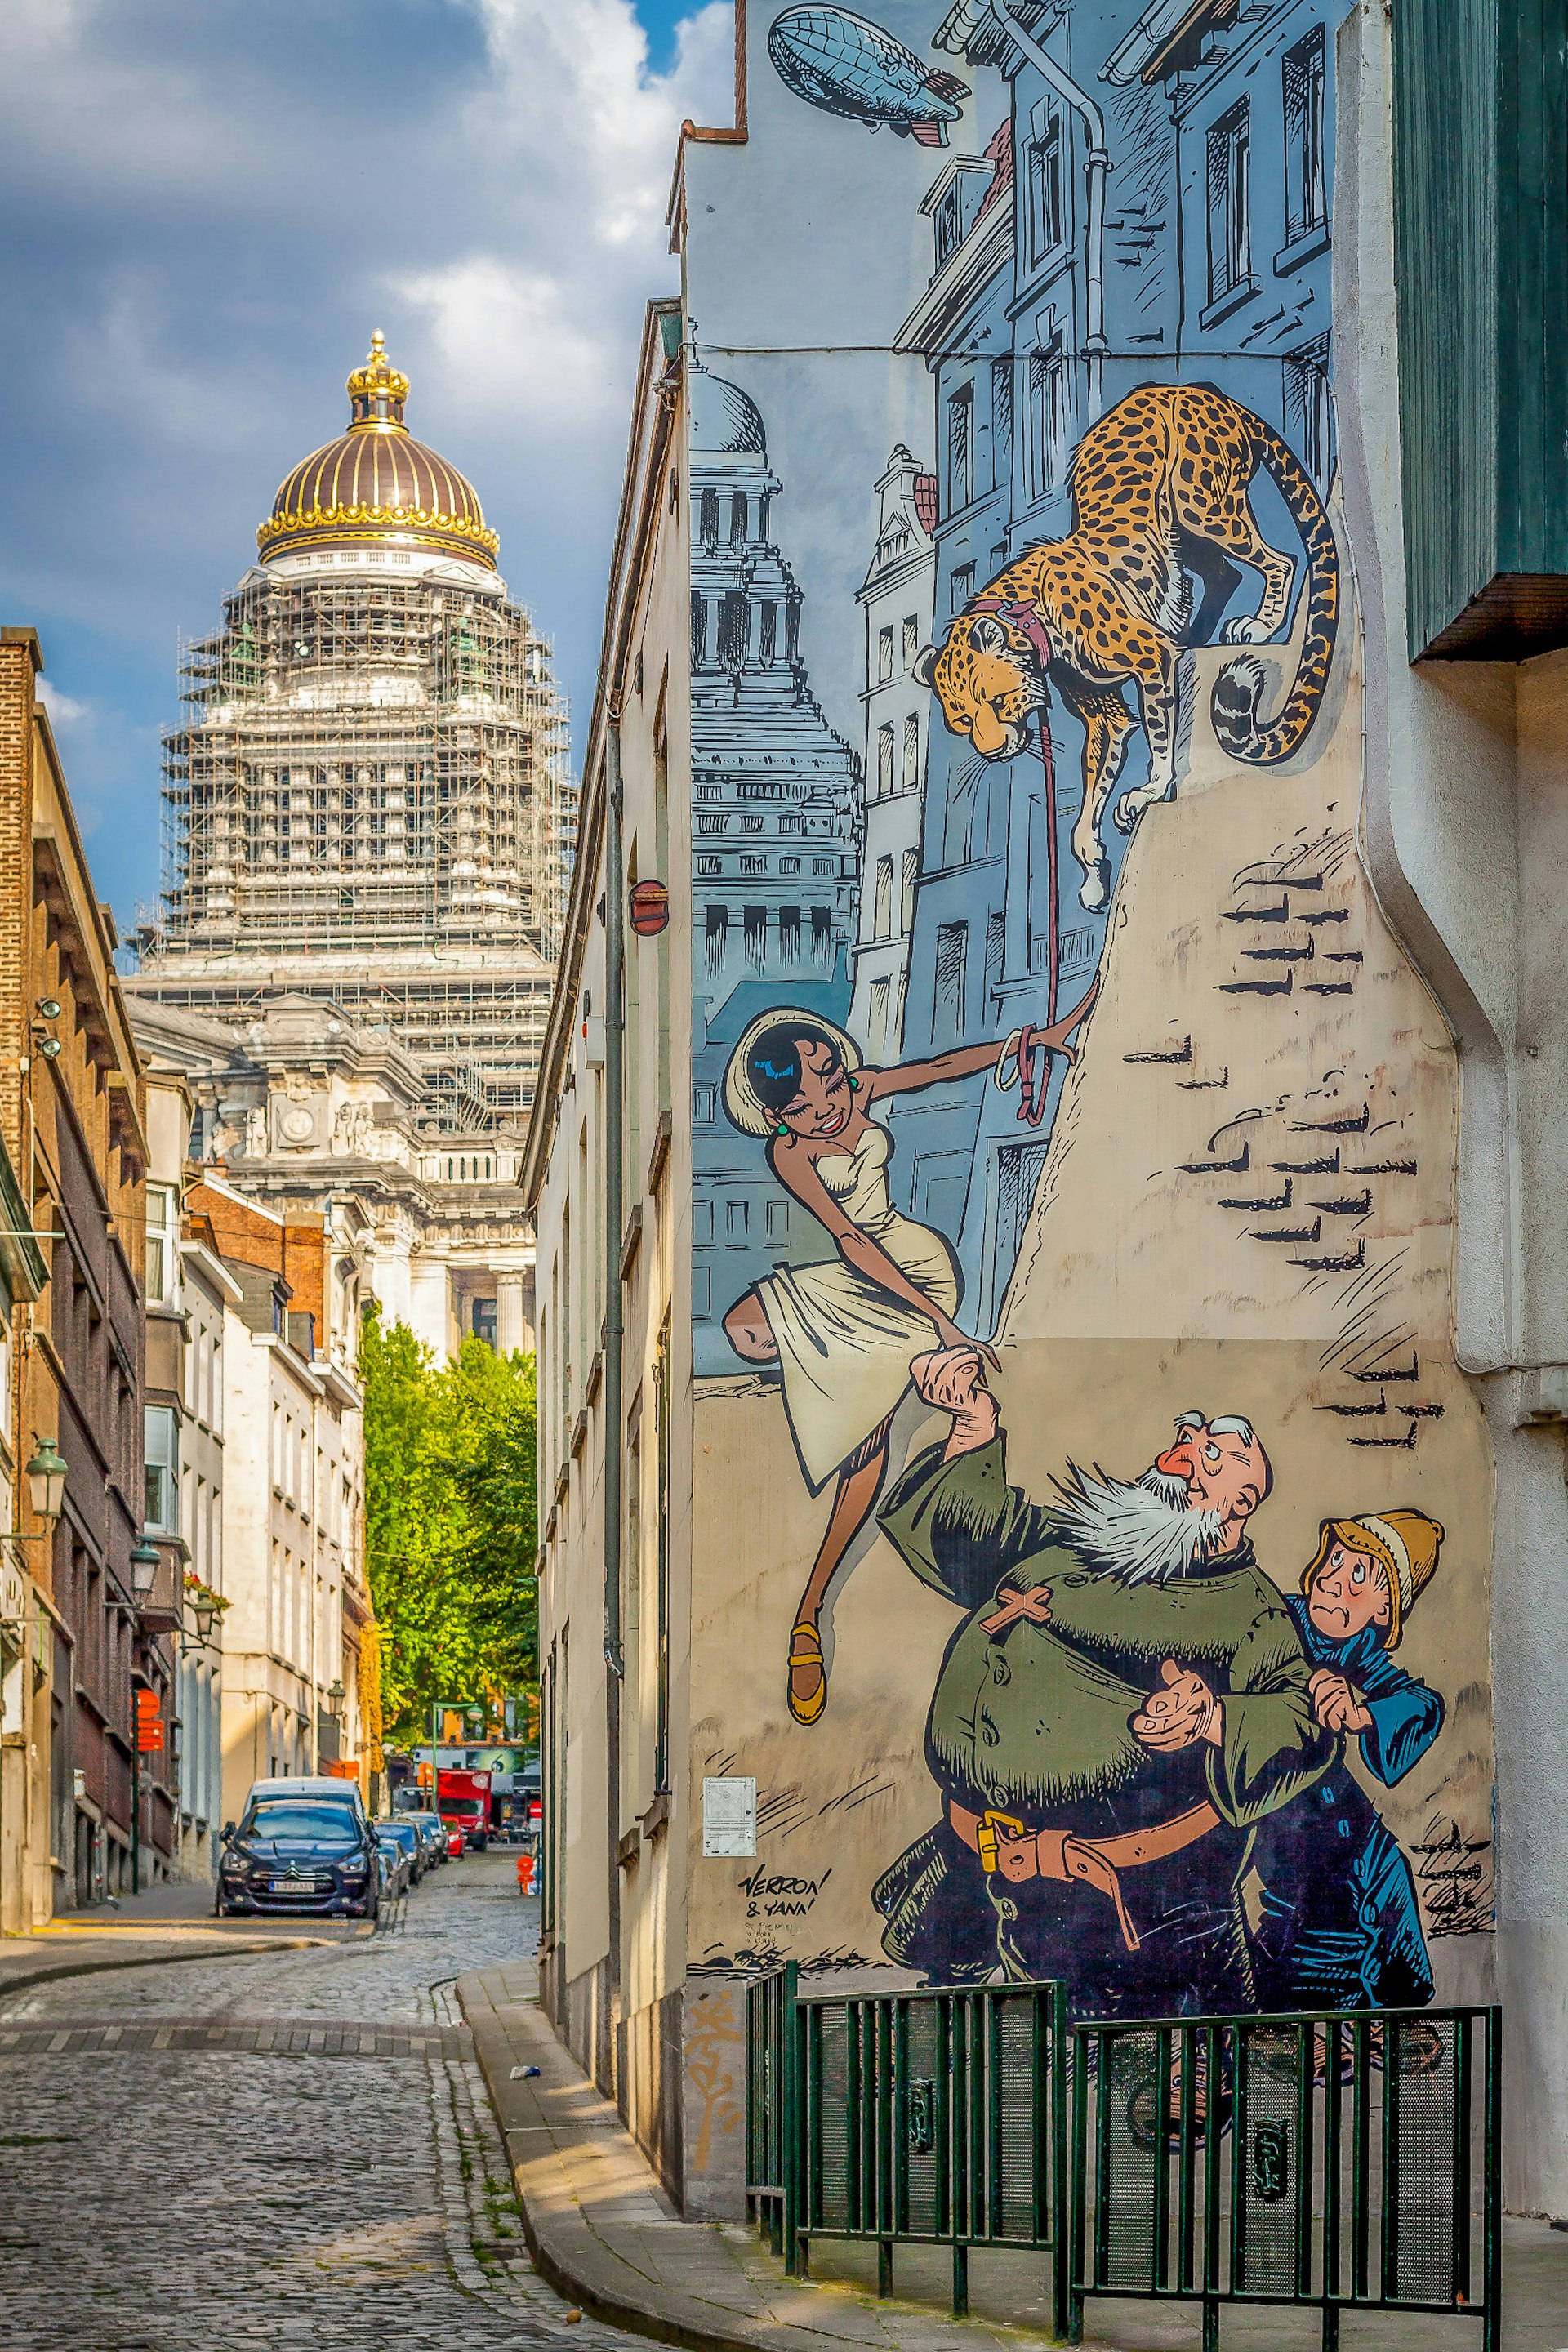 A comic-strip mural of an older man helping a women down a ledge in Brussels city centre